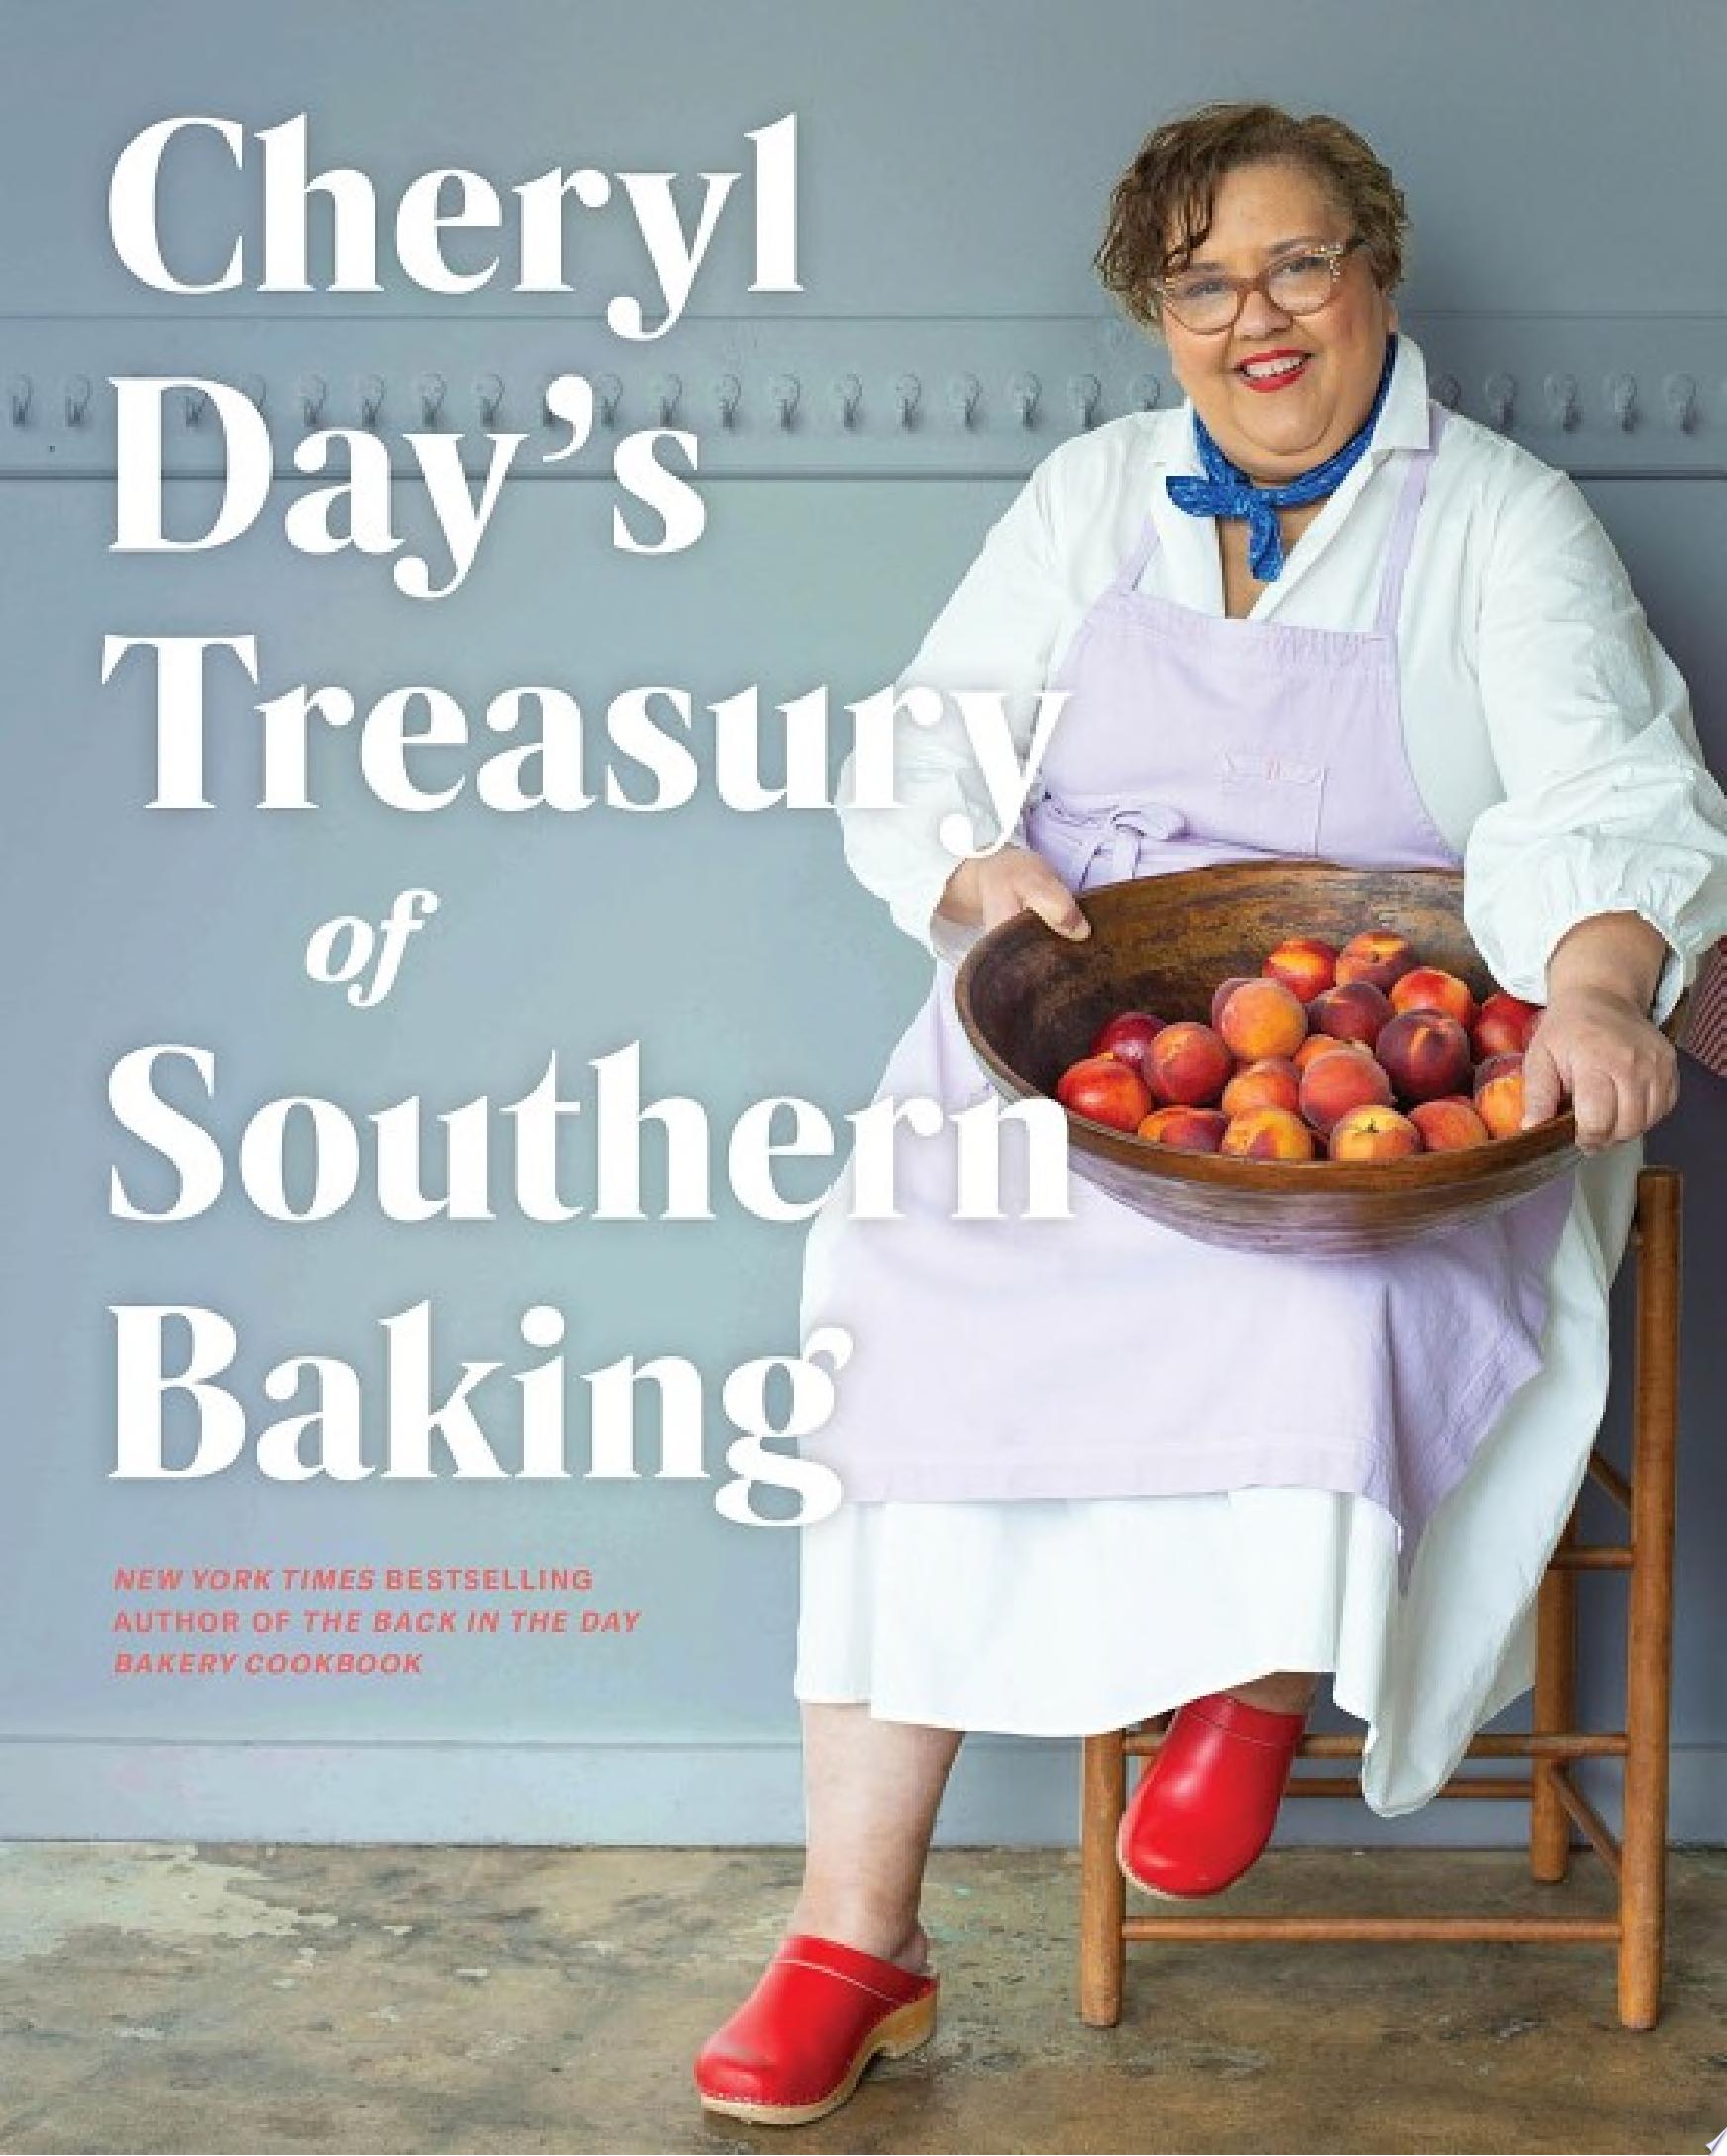 Image for "Cheryl Day&#039;s Treasury of Southern Baking"